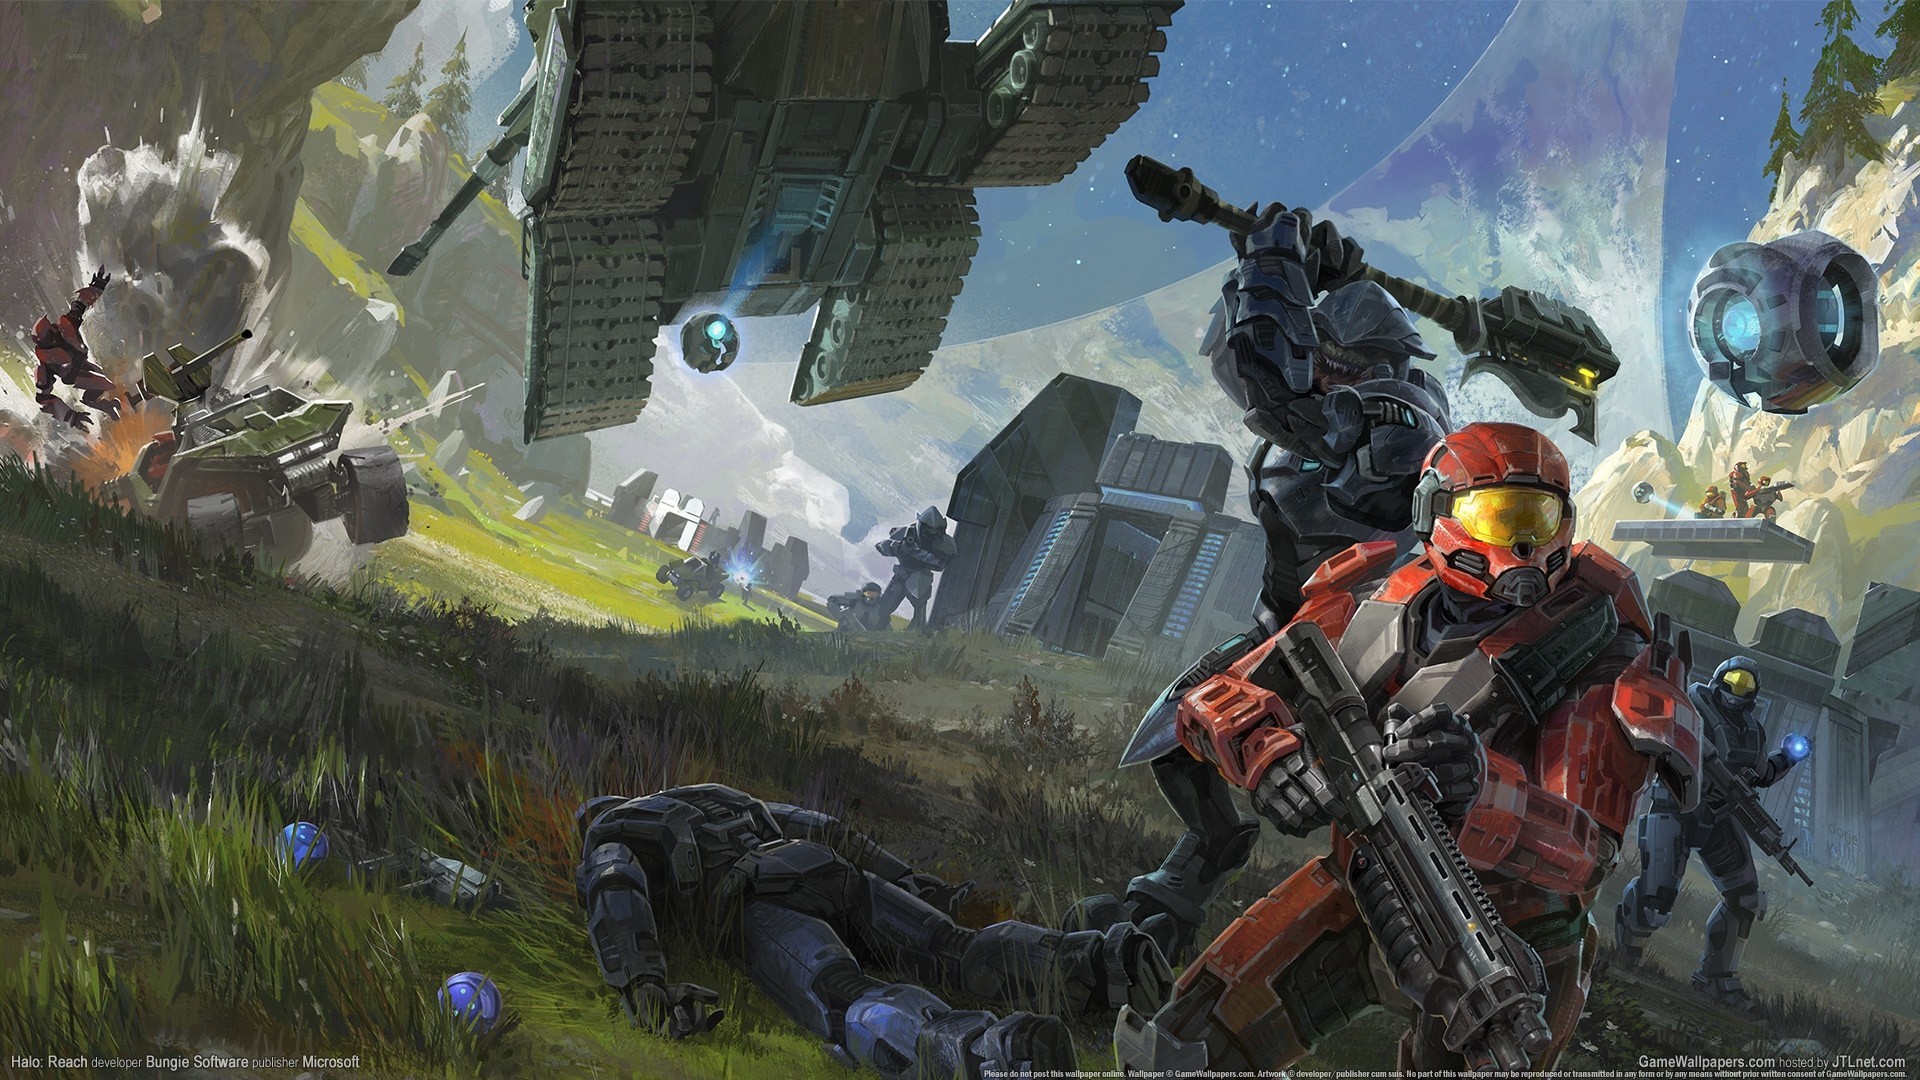 1920x1080 An amazing piece of concept art for Halo Reach, which I assume is  highlighting the